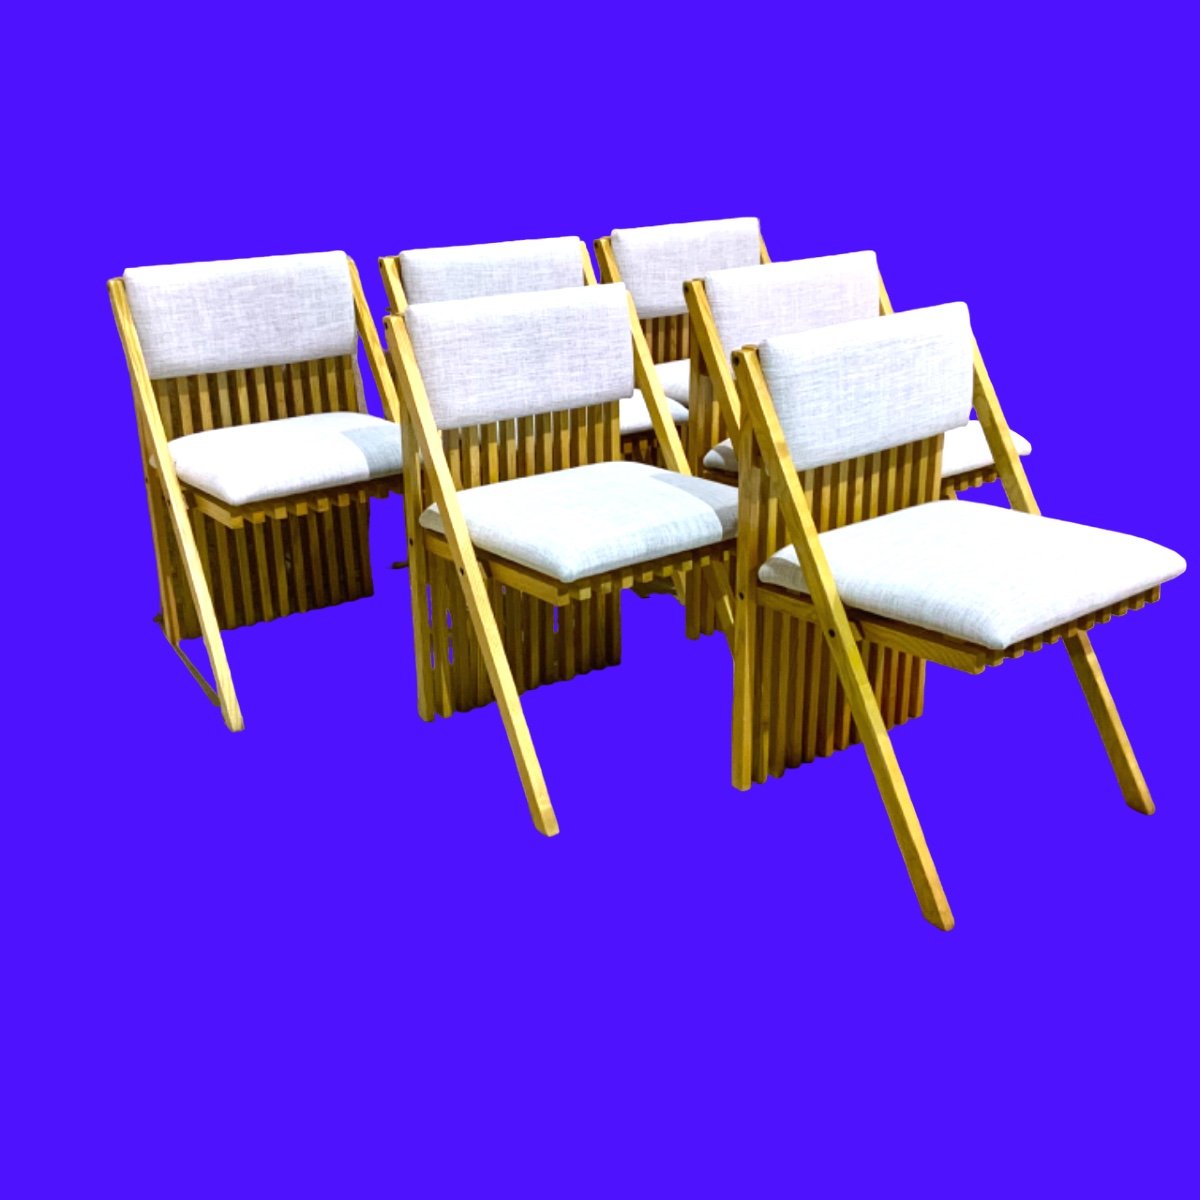 6 Solid Wood Chairs By Tito Pinori, Millepiedi Model, Italy 1970s-photo-4